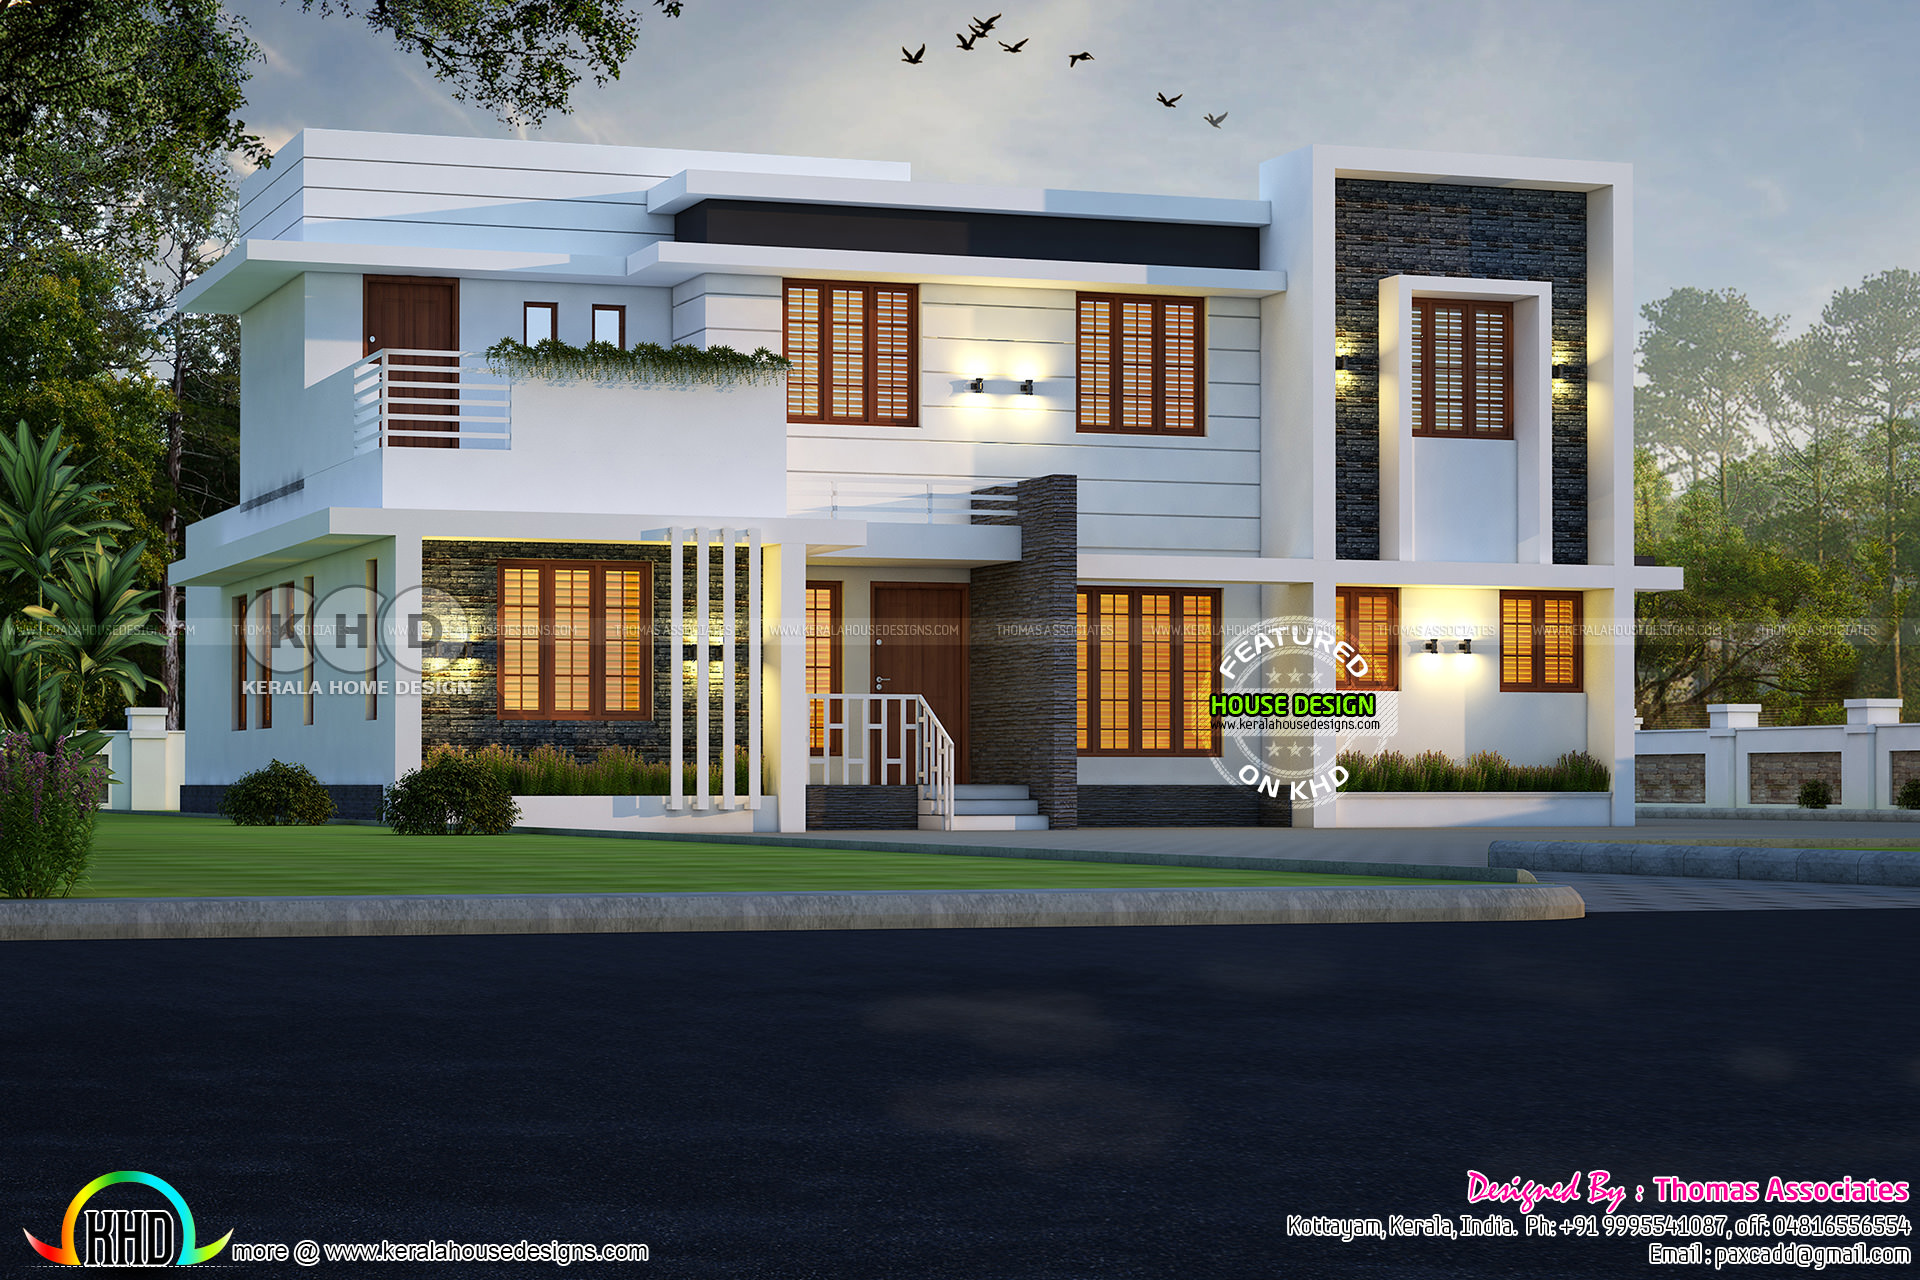 Single Floor 1400 Sq Ft House Look Like, 1400 Square Foot House Plans 3 Bedroom